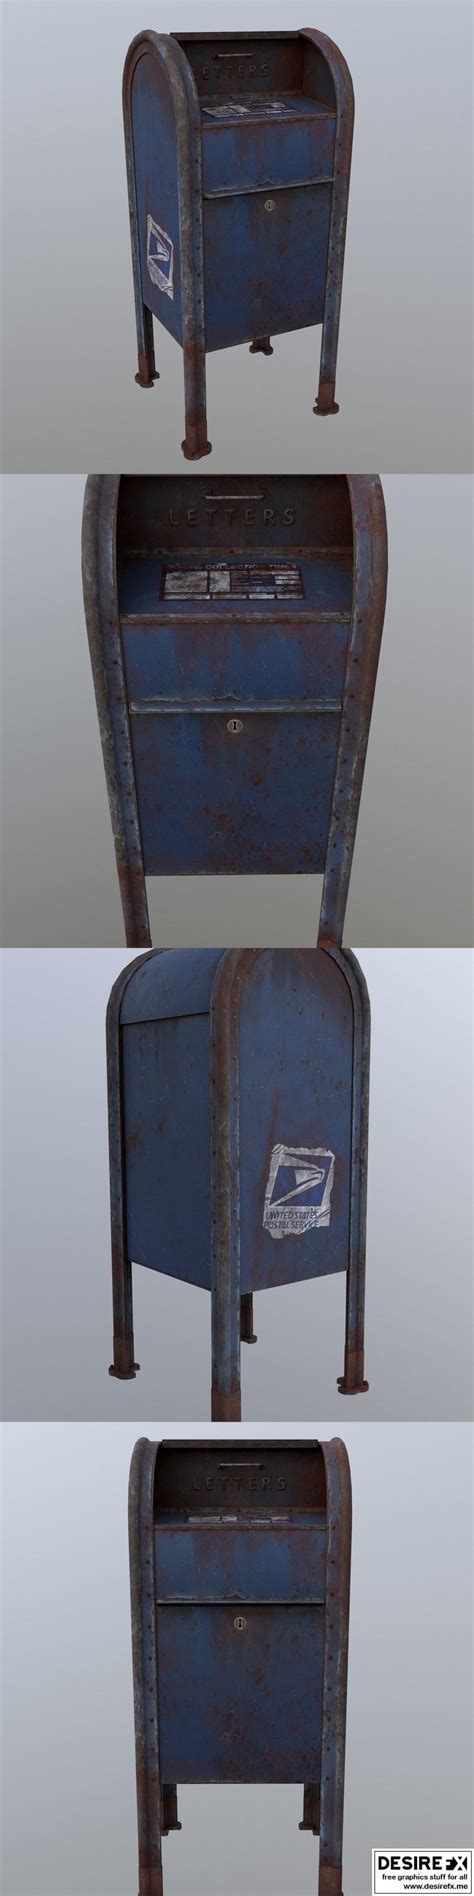 Desire FX 3d Models Rusted Mailbox